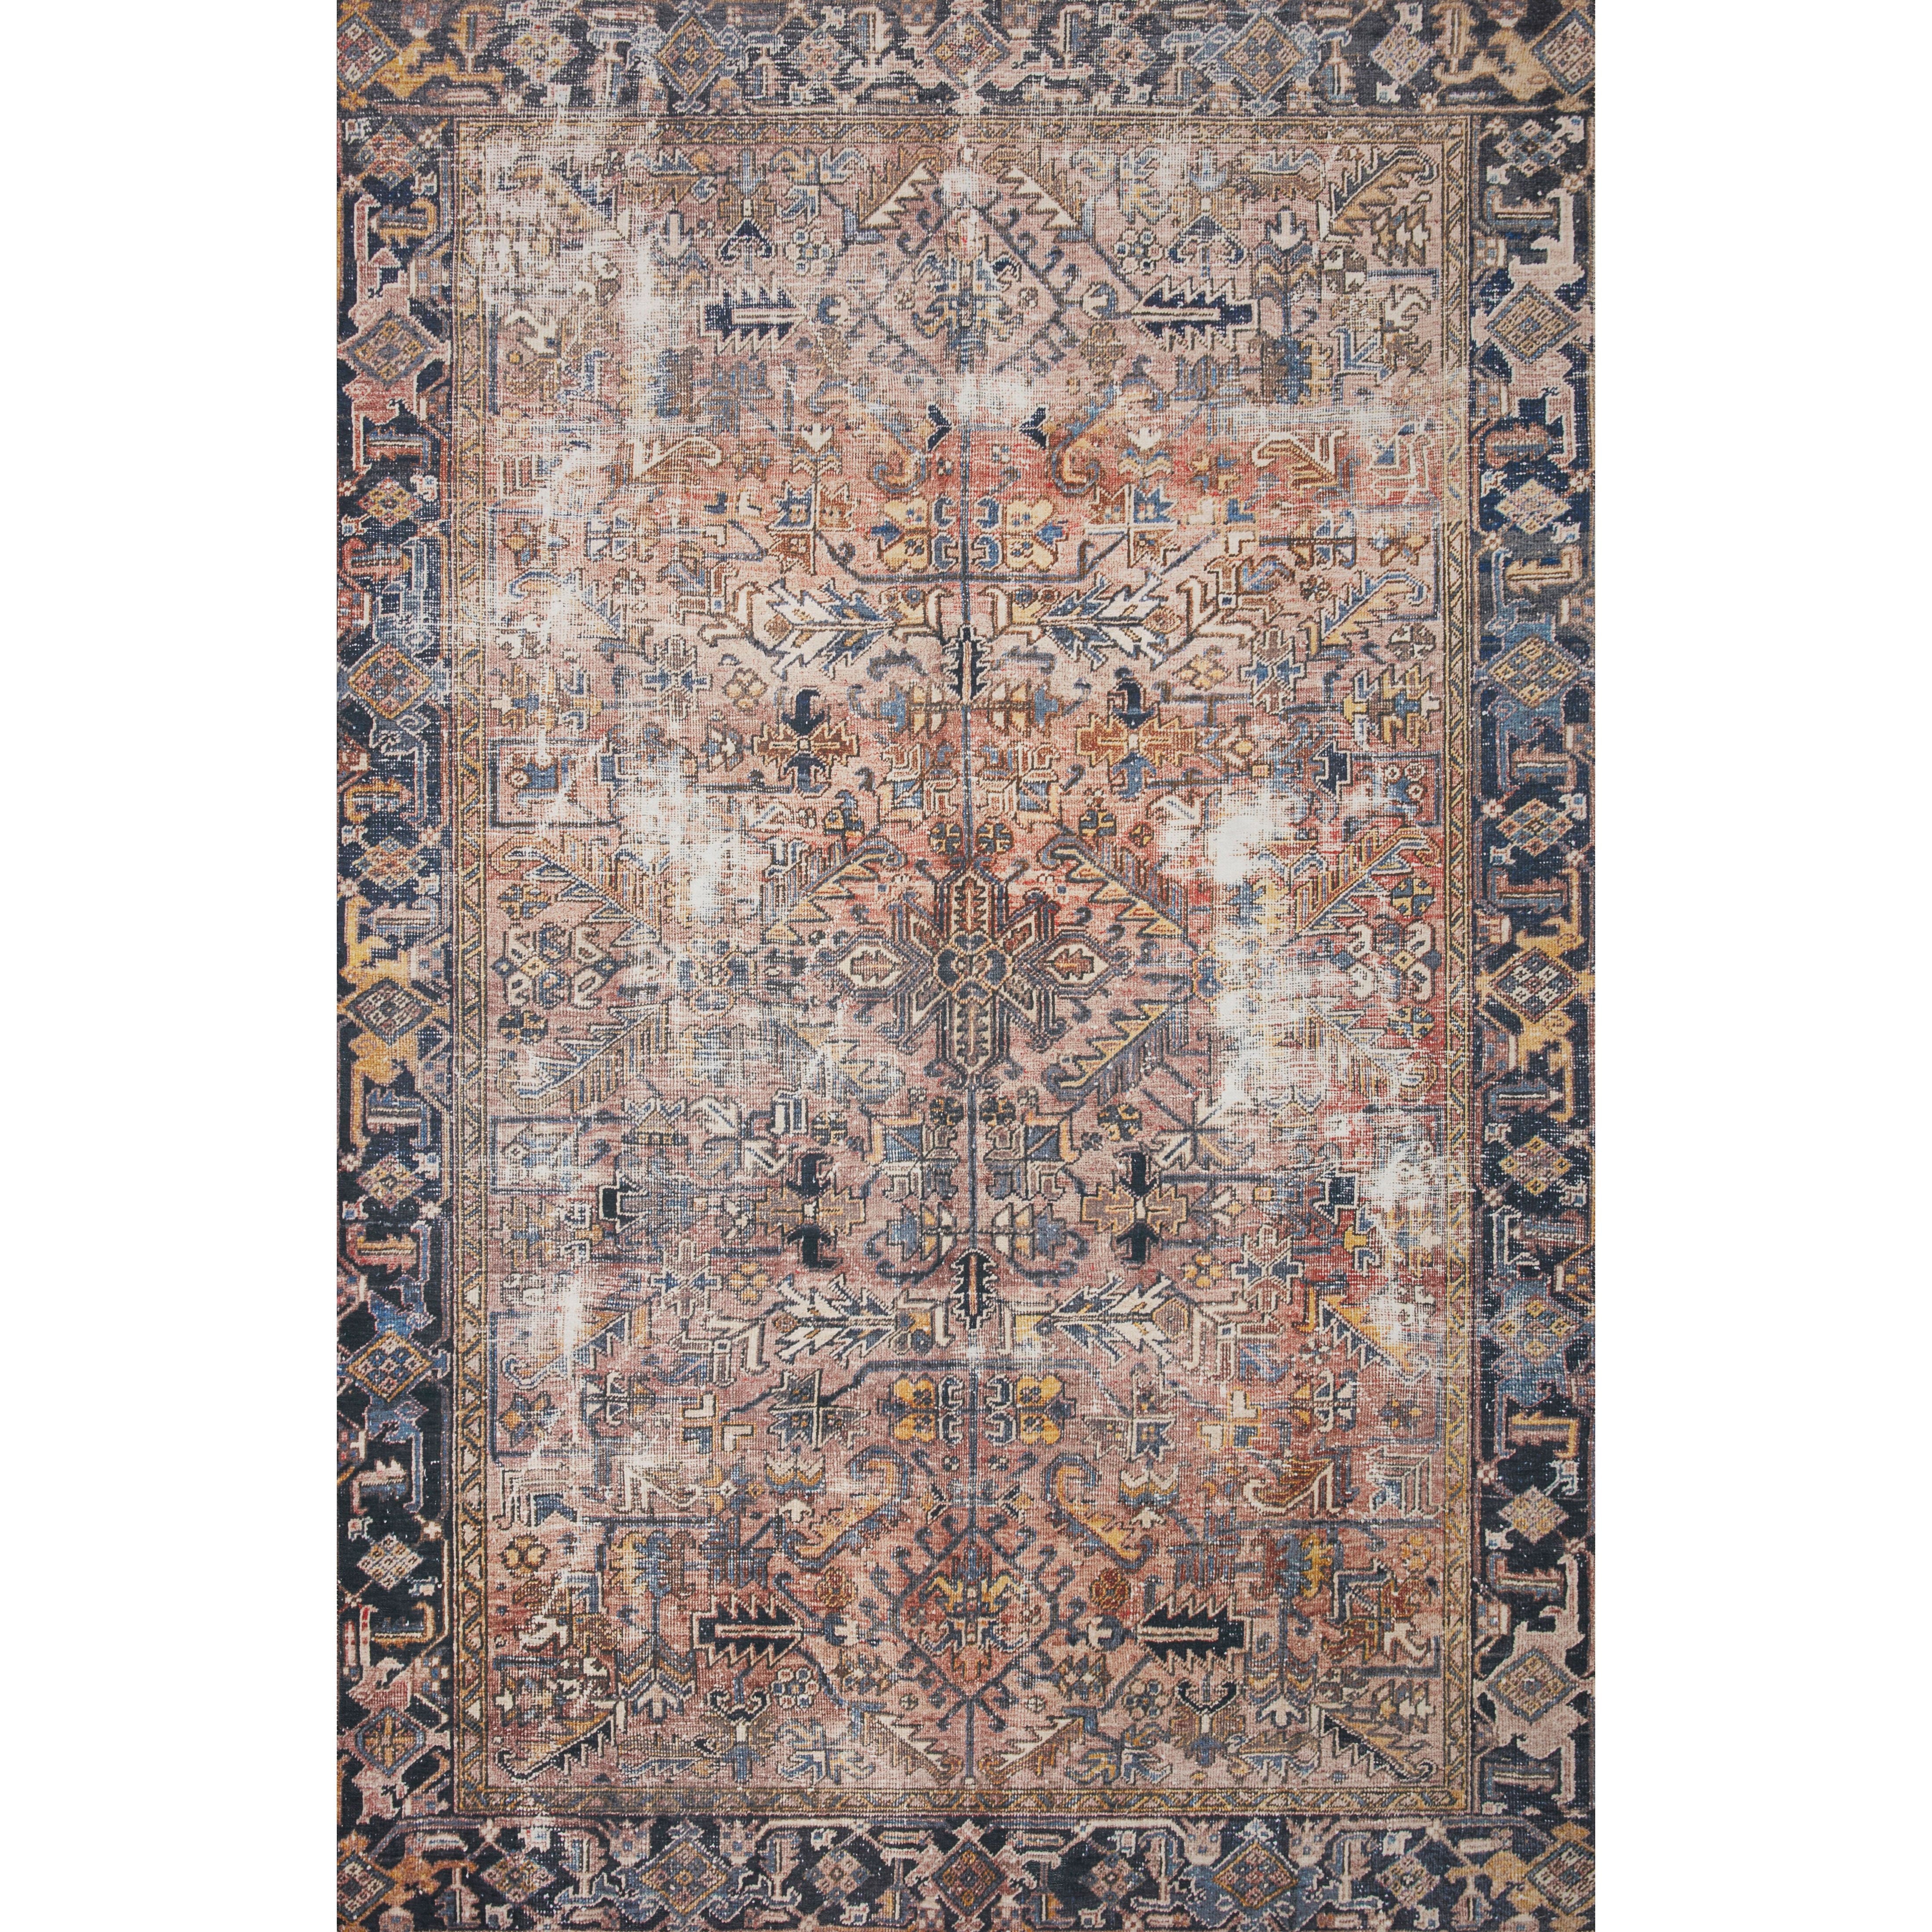 Durable, low pile, and soft underfoot, this rug is inspired by classic vintage and antique rugs. The Jules Chris Loves Julia Terracotta / Multi JUL-02 rug from Loloi features a beautiful vintage pattern and patina. The rug is easy to clean and maintain and perfect for living rooms, dining rooms, hallways, and kitchens!